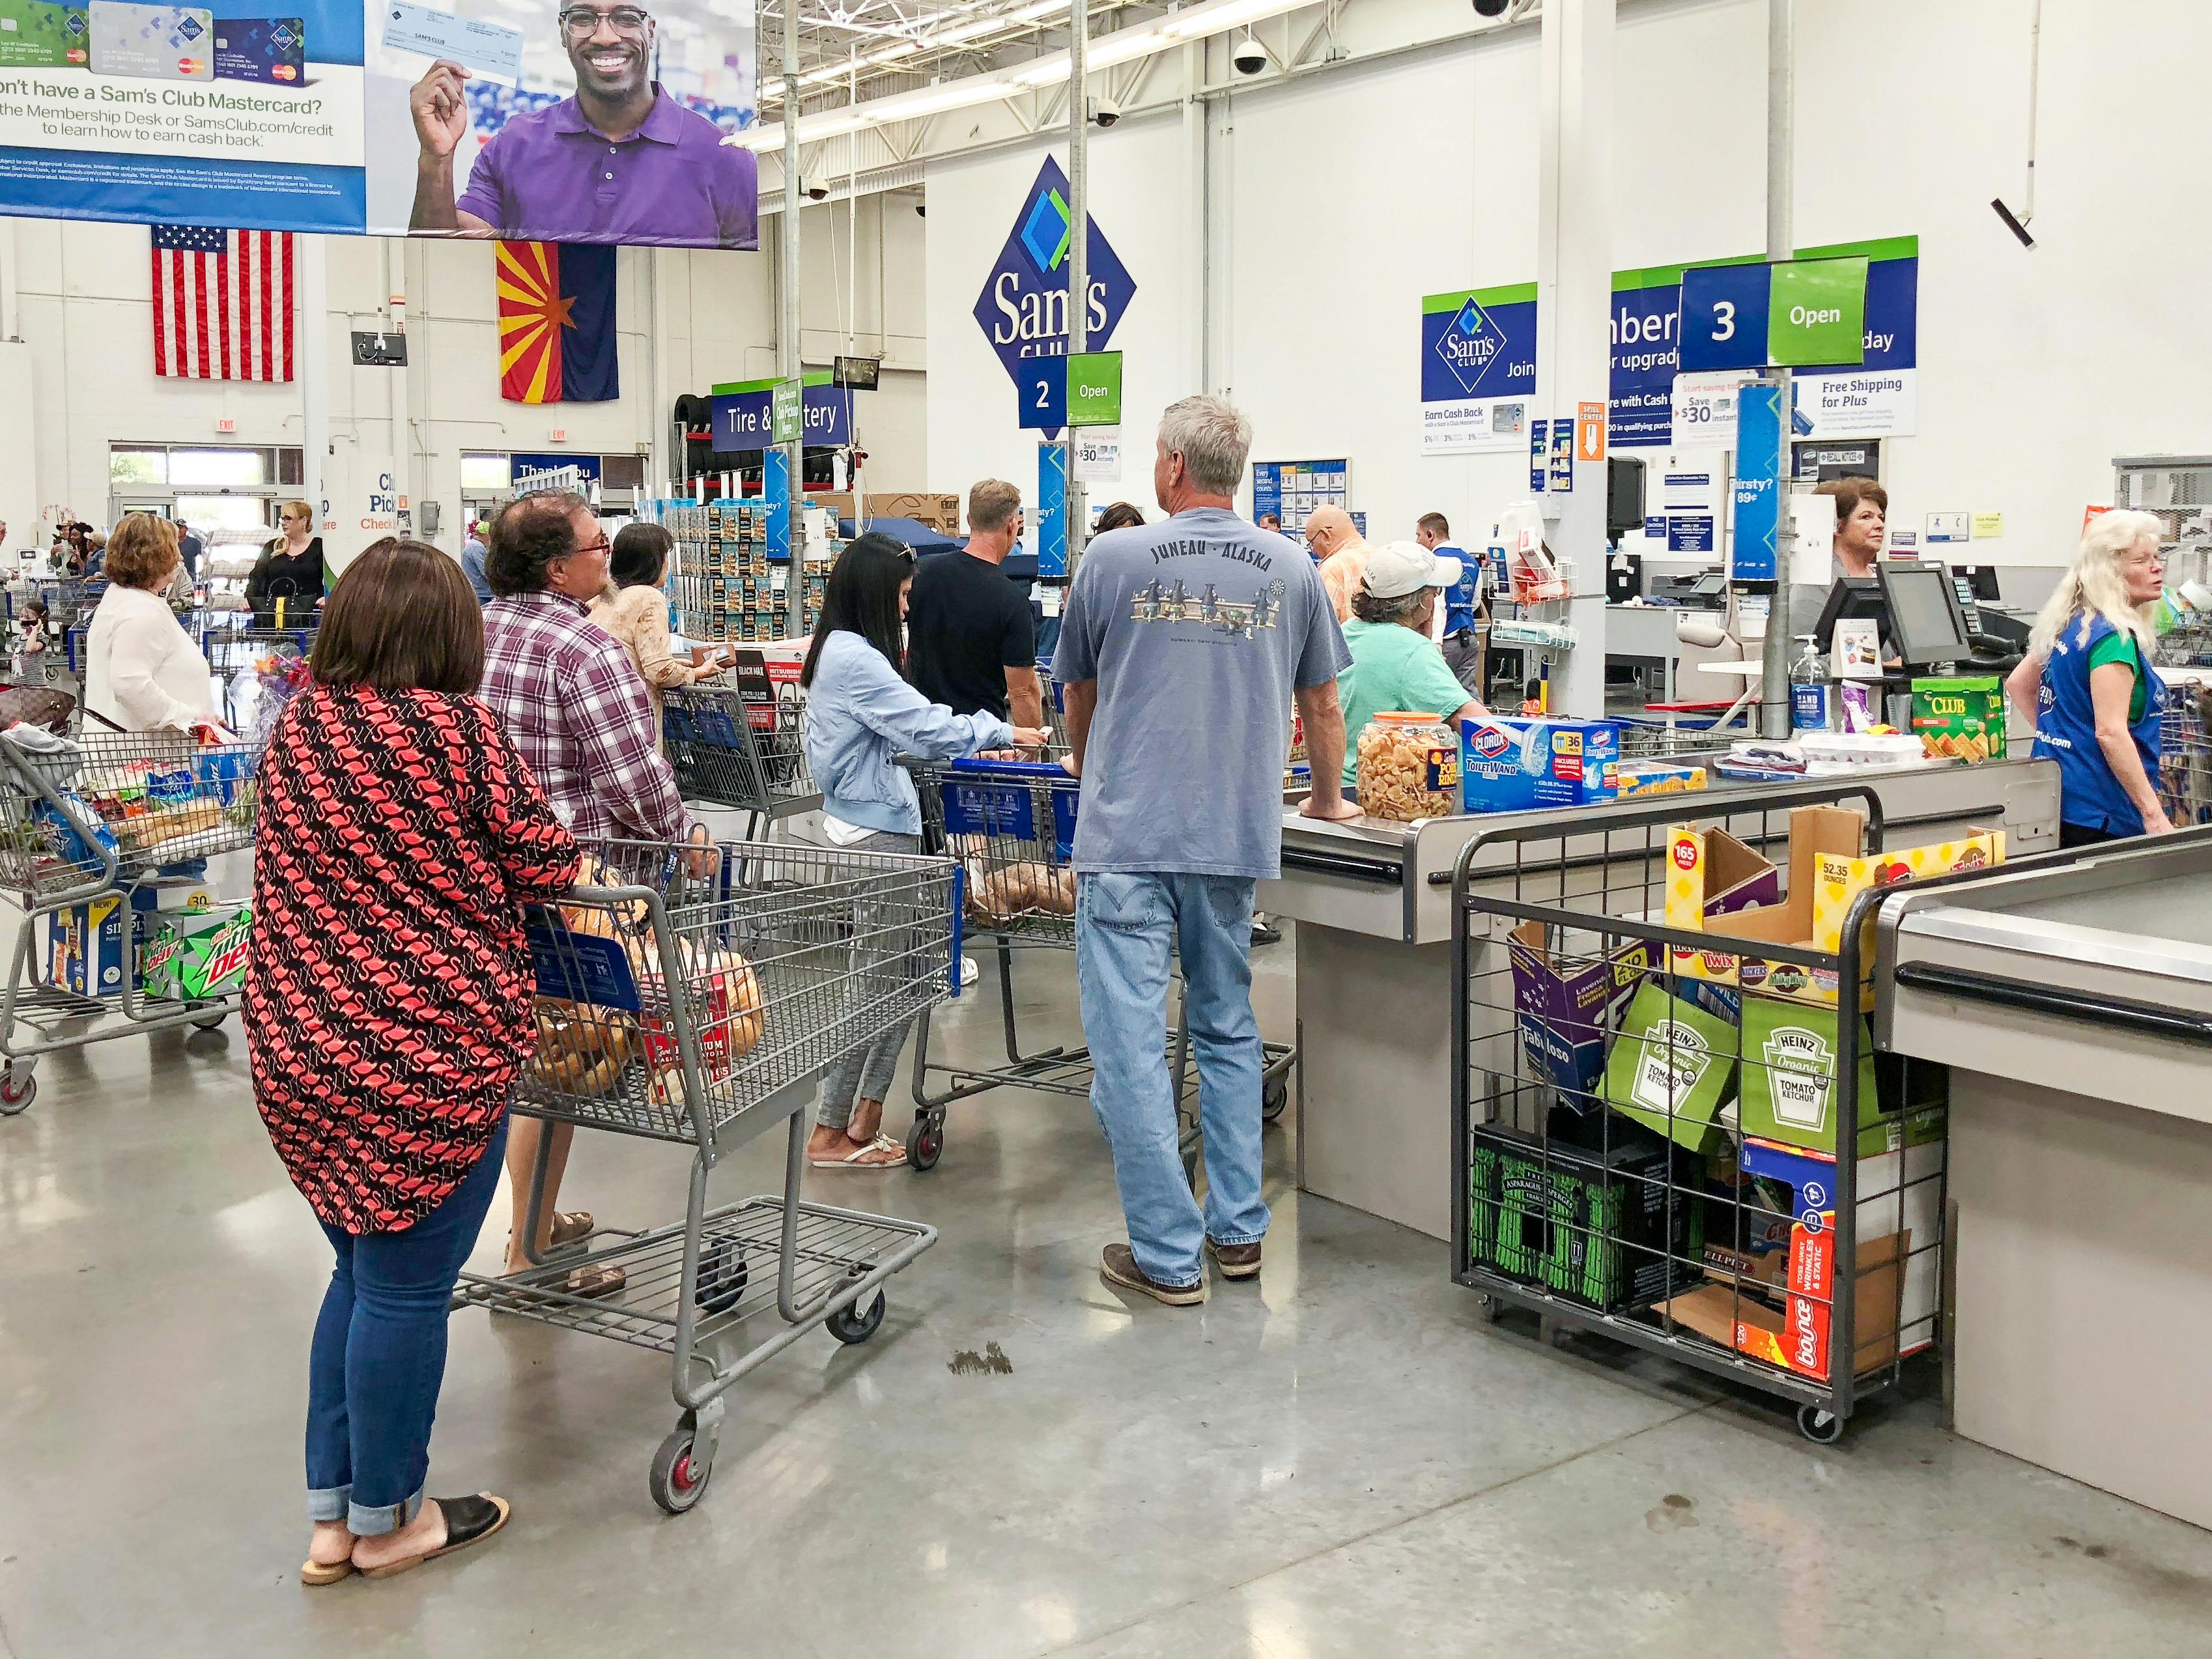 Sam's Club members standing in line for checkout with carts full of groceries and other items.